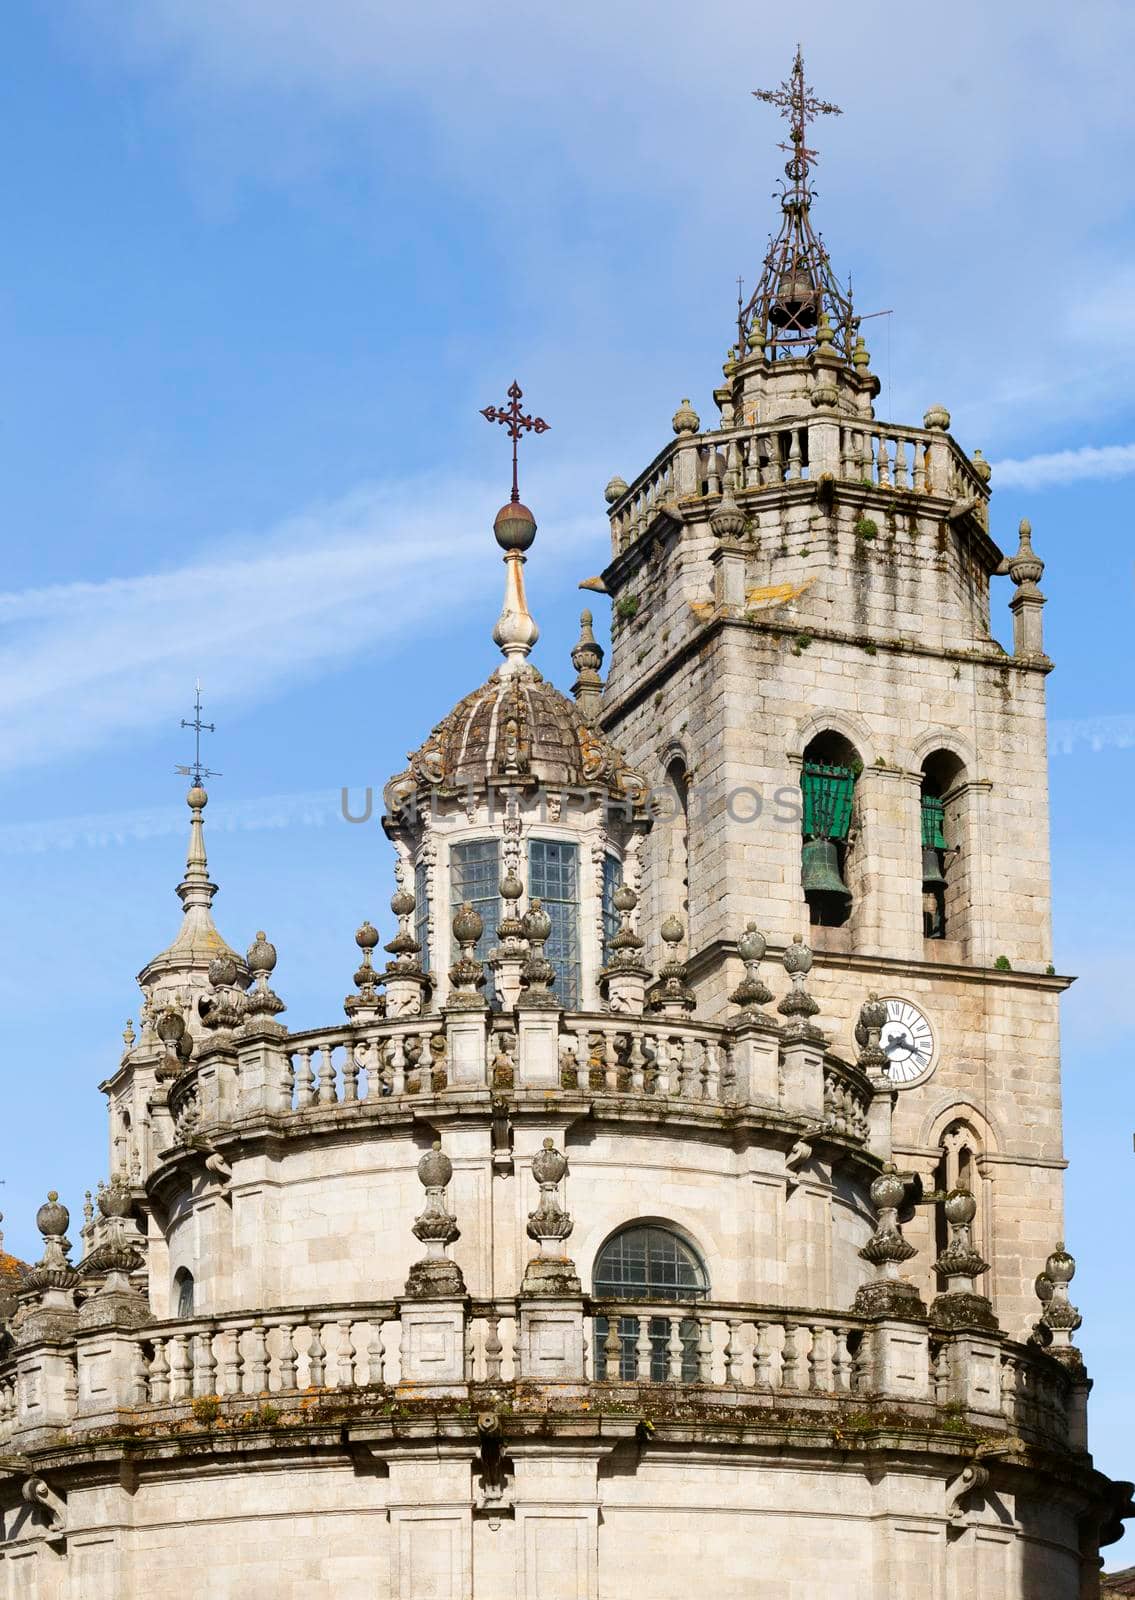 Towers of Saint Mary's Cathedral in Lugo, Spain